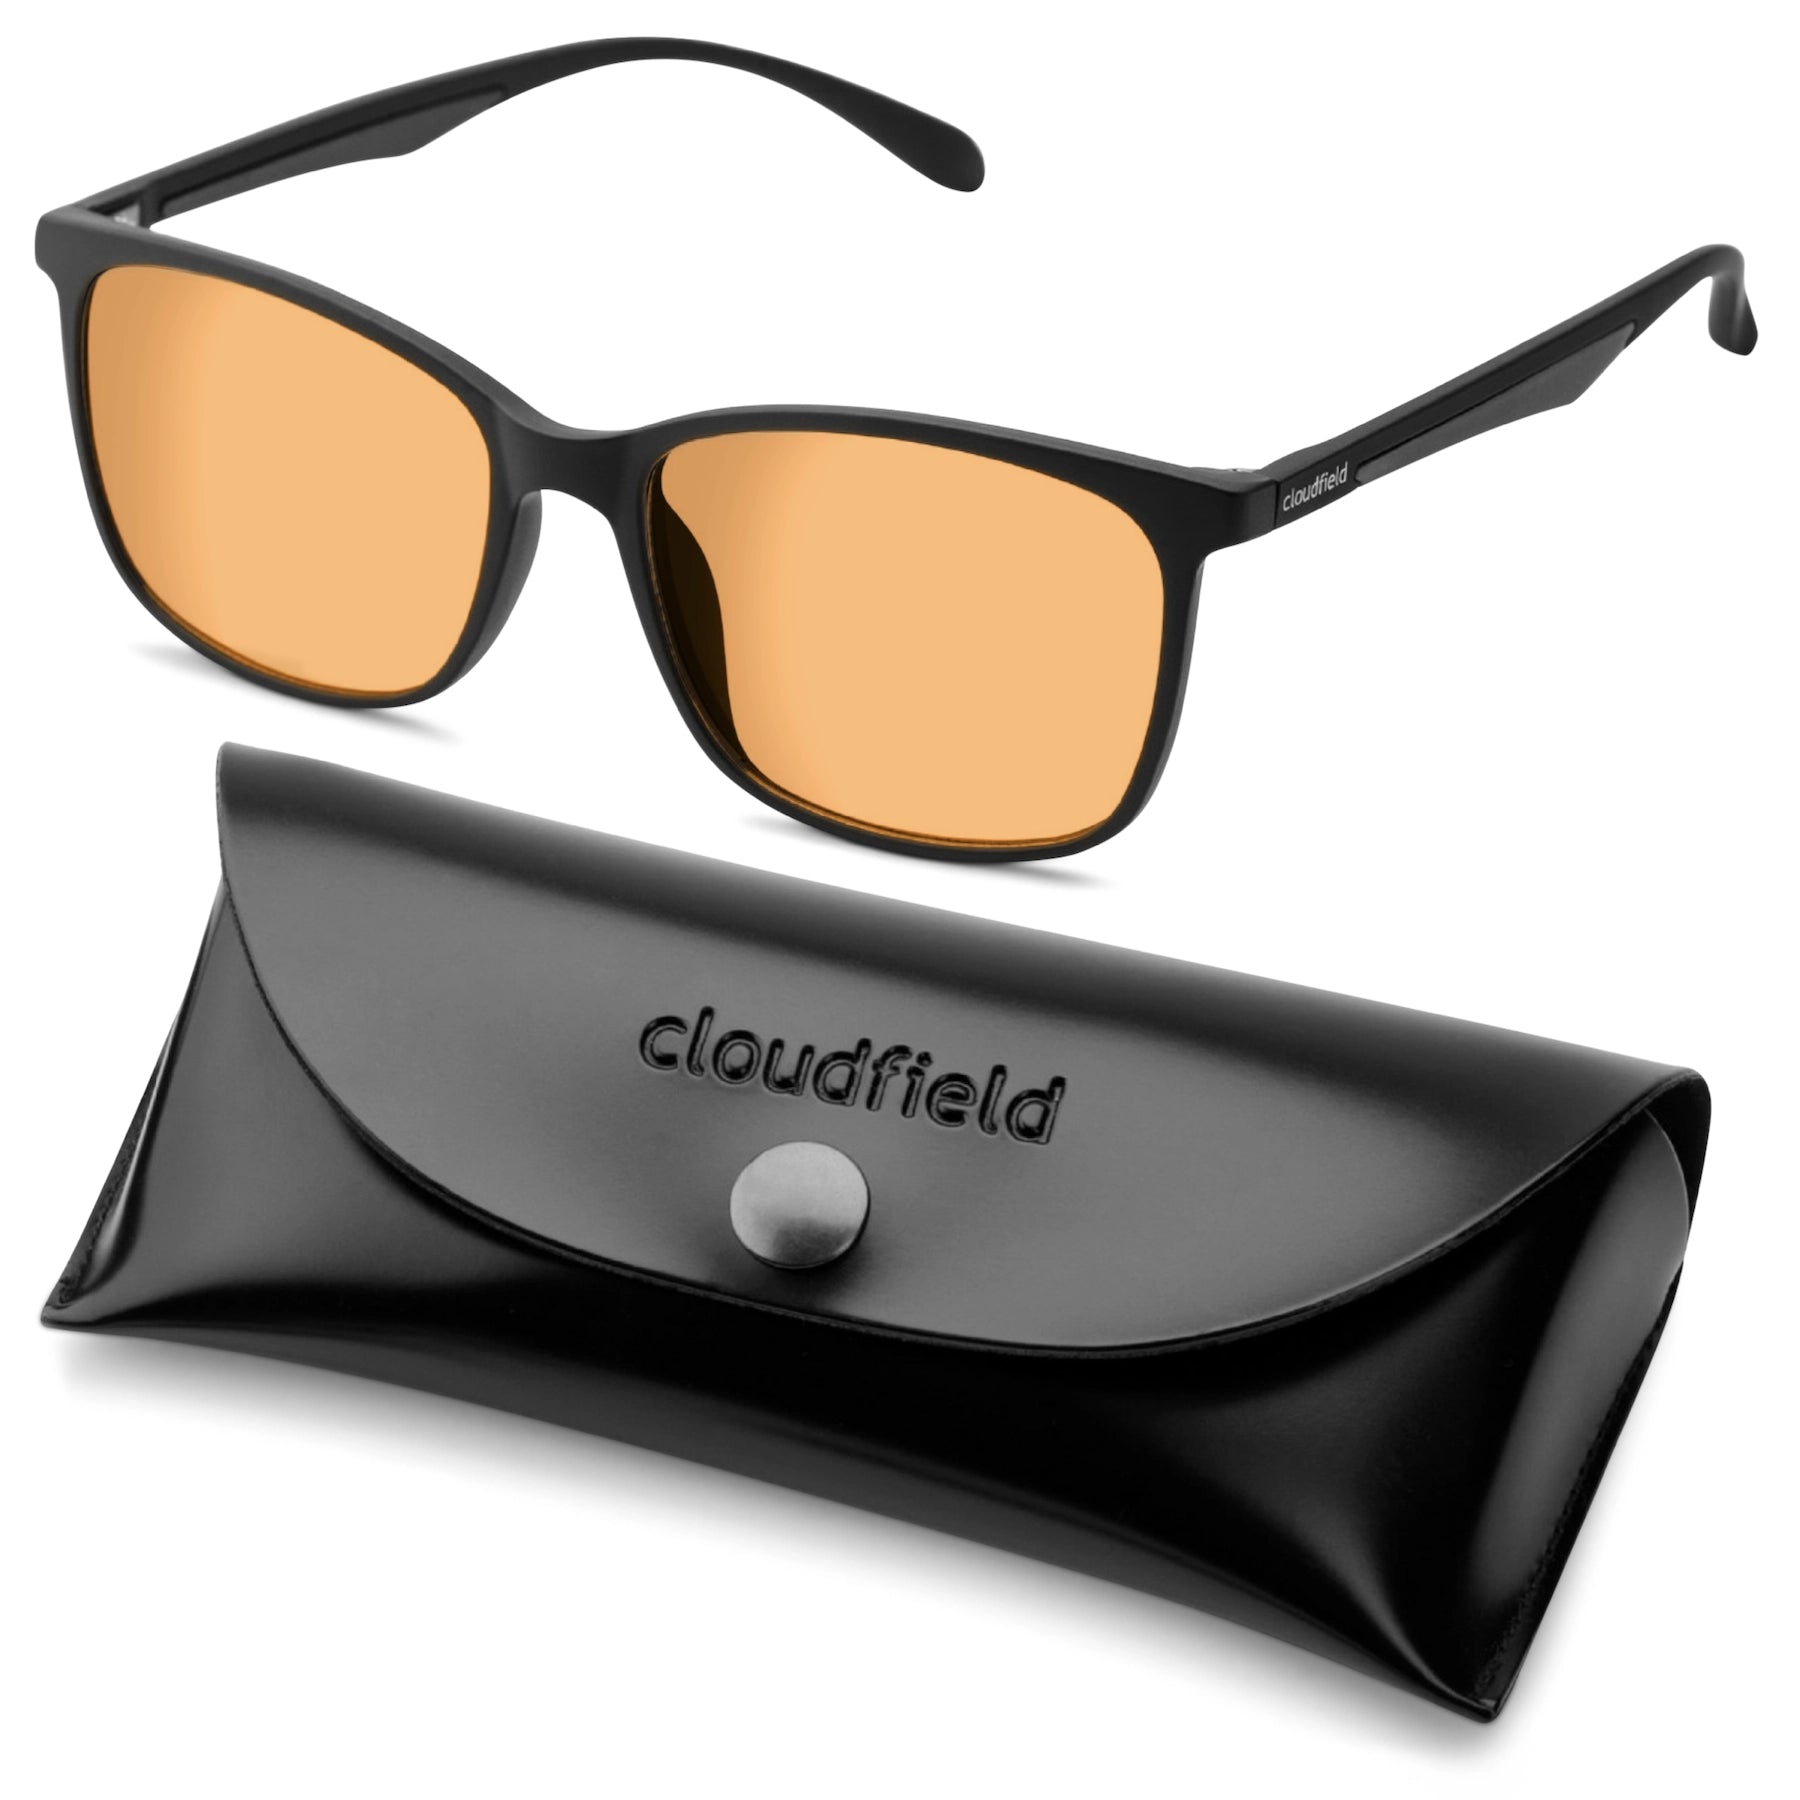 Cloudfield Blue Light Screen Protection Glasses